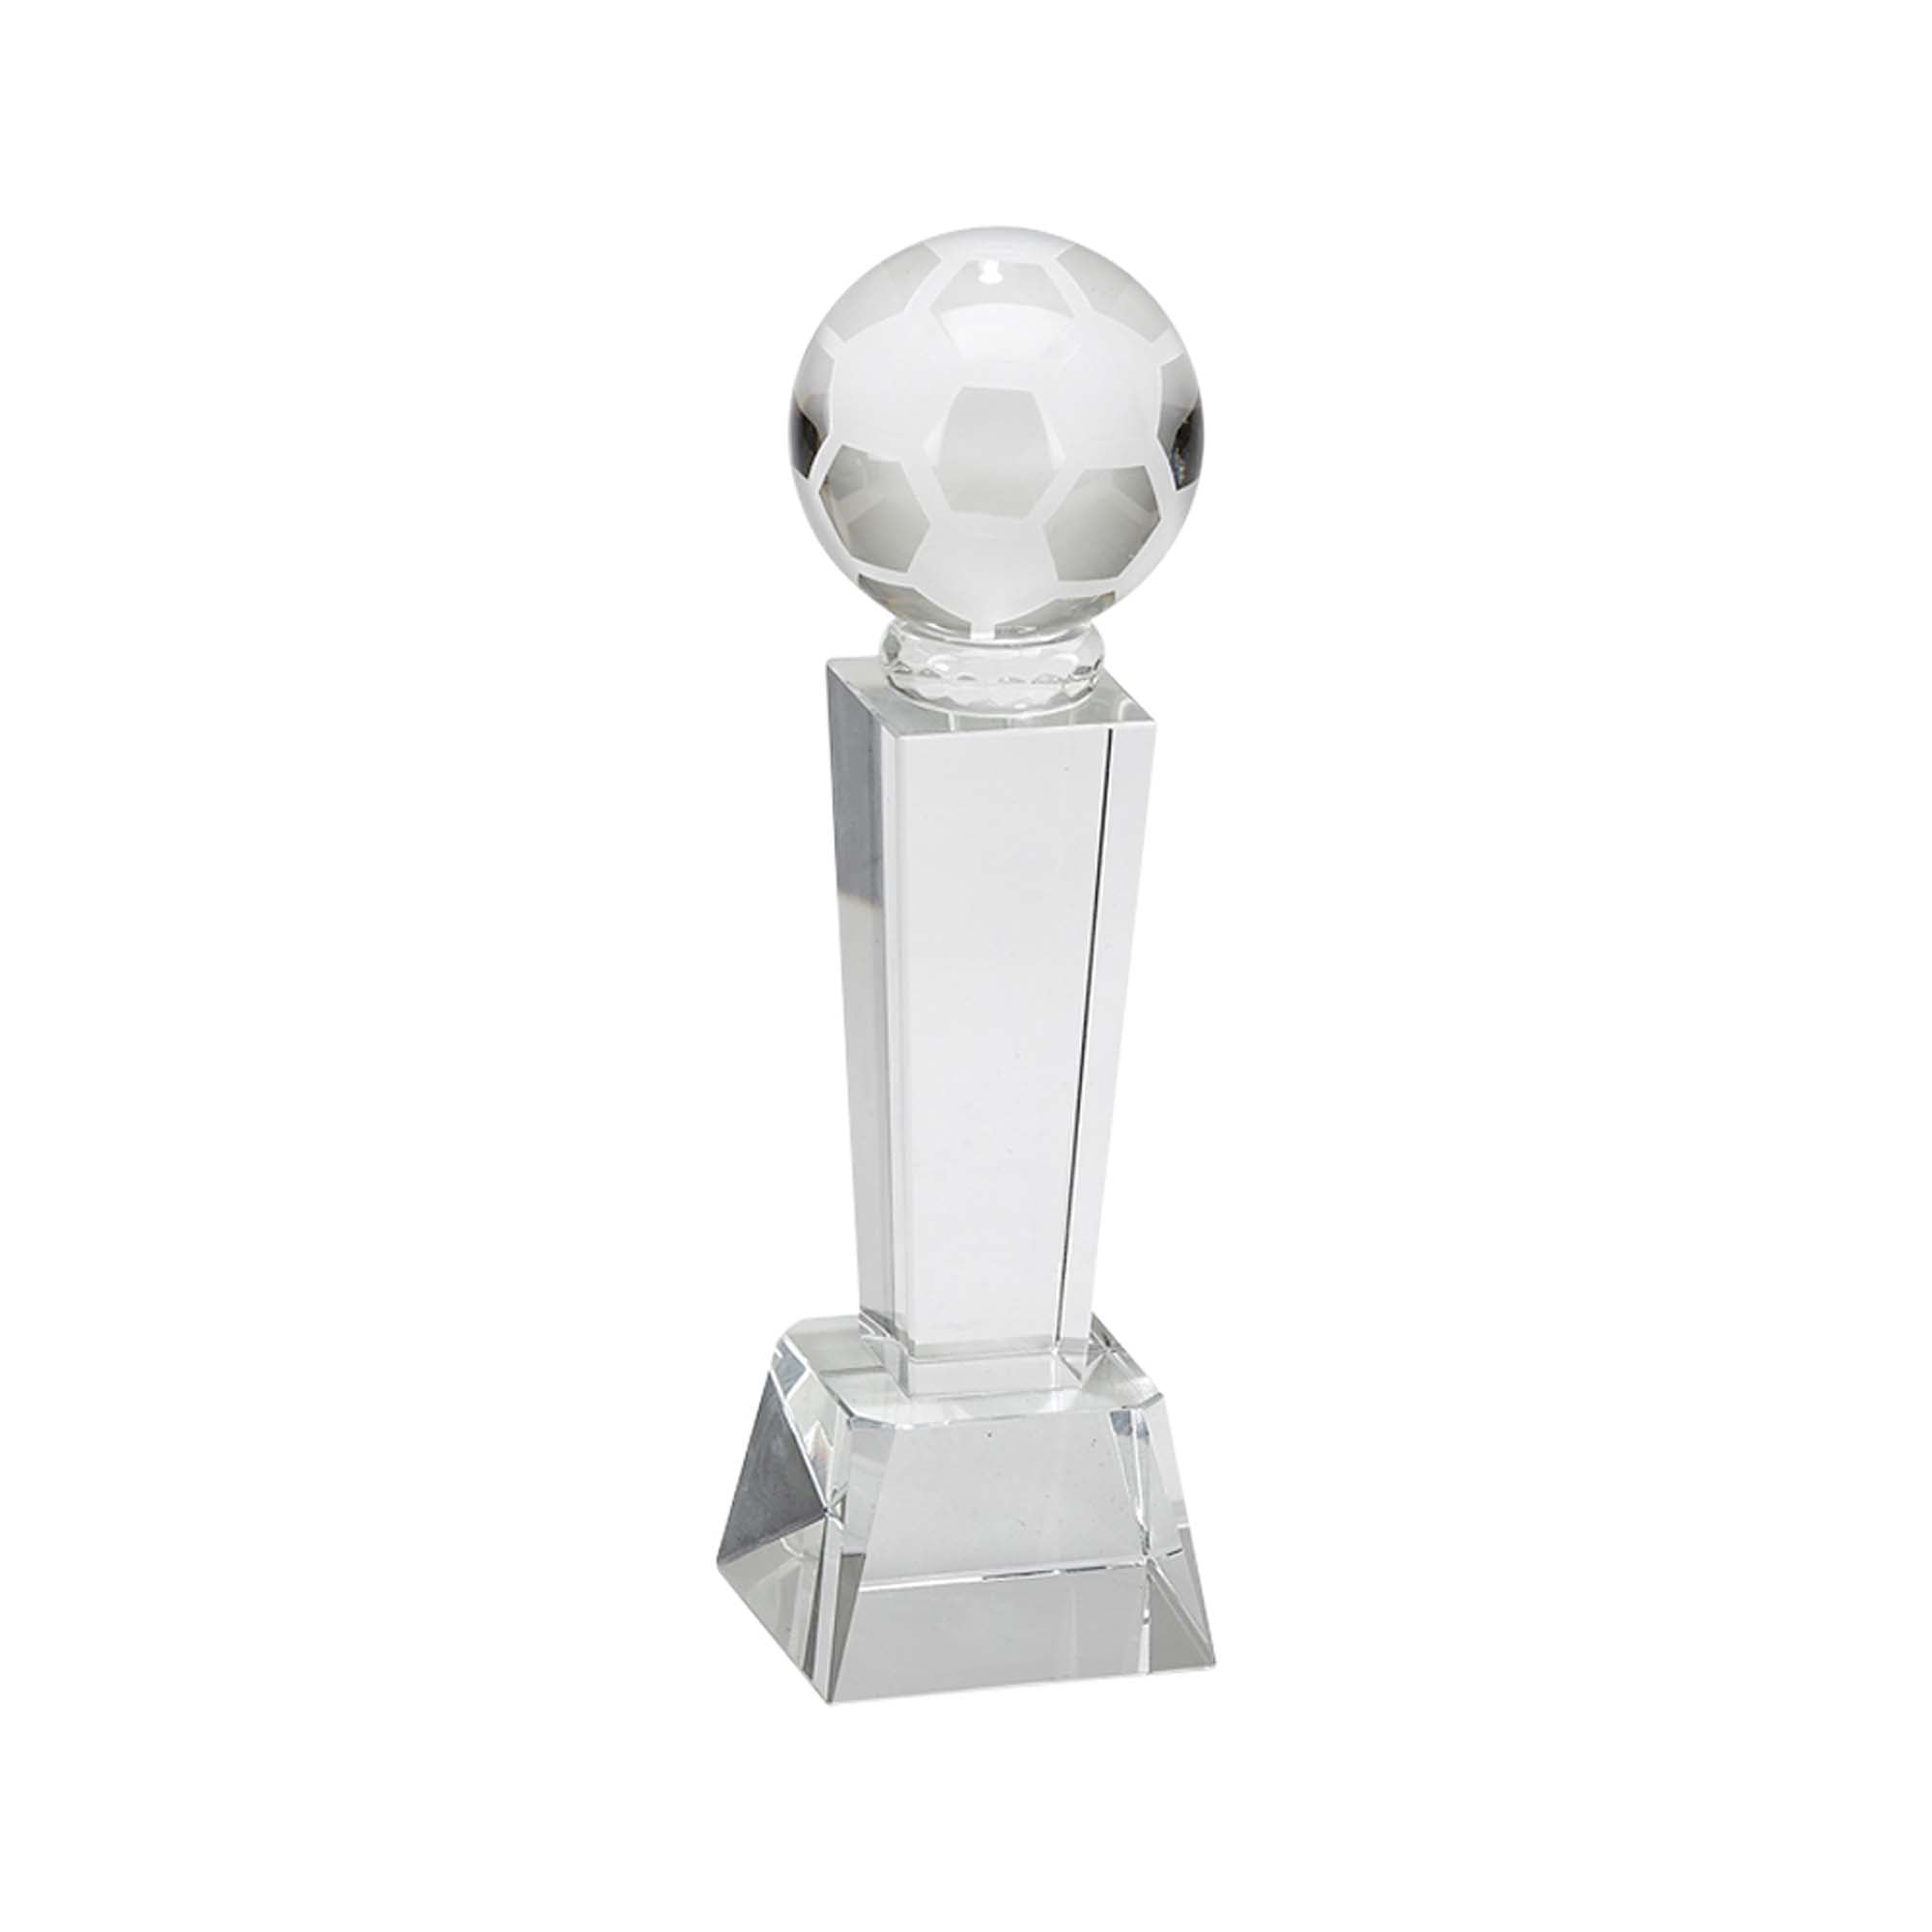 Picture of Creative Gifts International 004791 8.75 in. Optic Obelisk Soccer Trophy